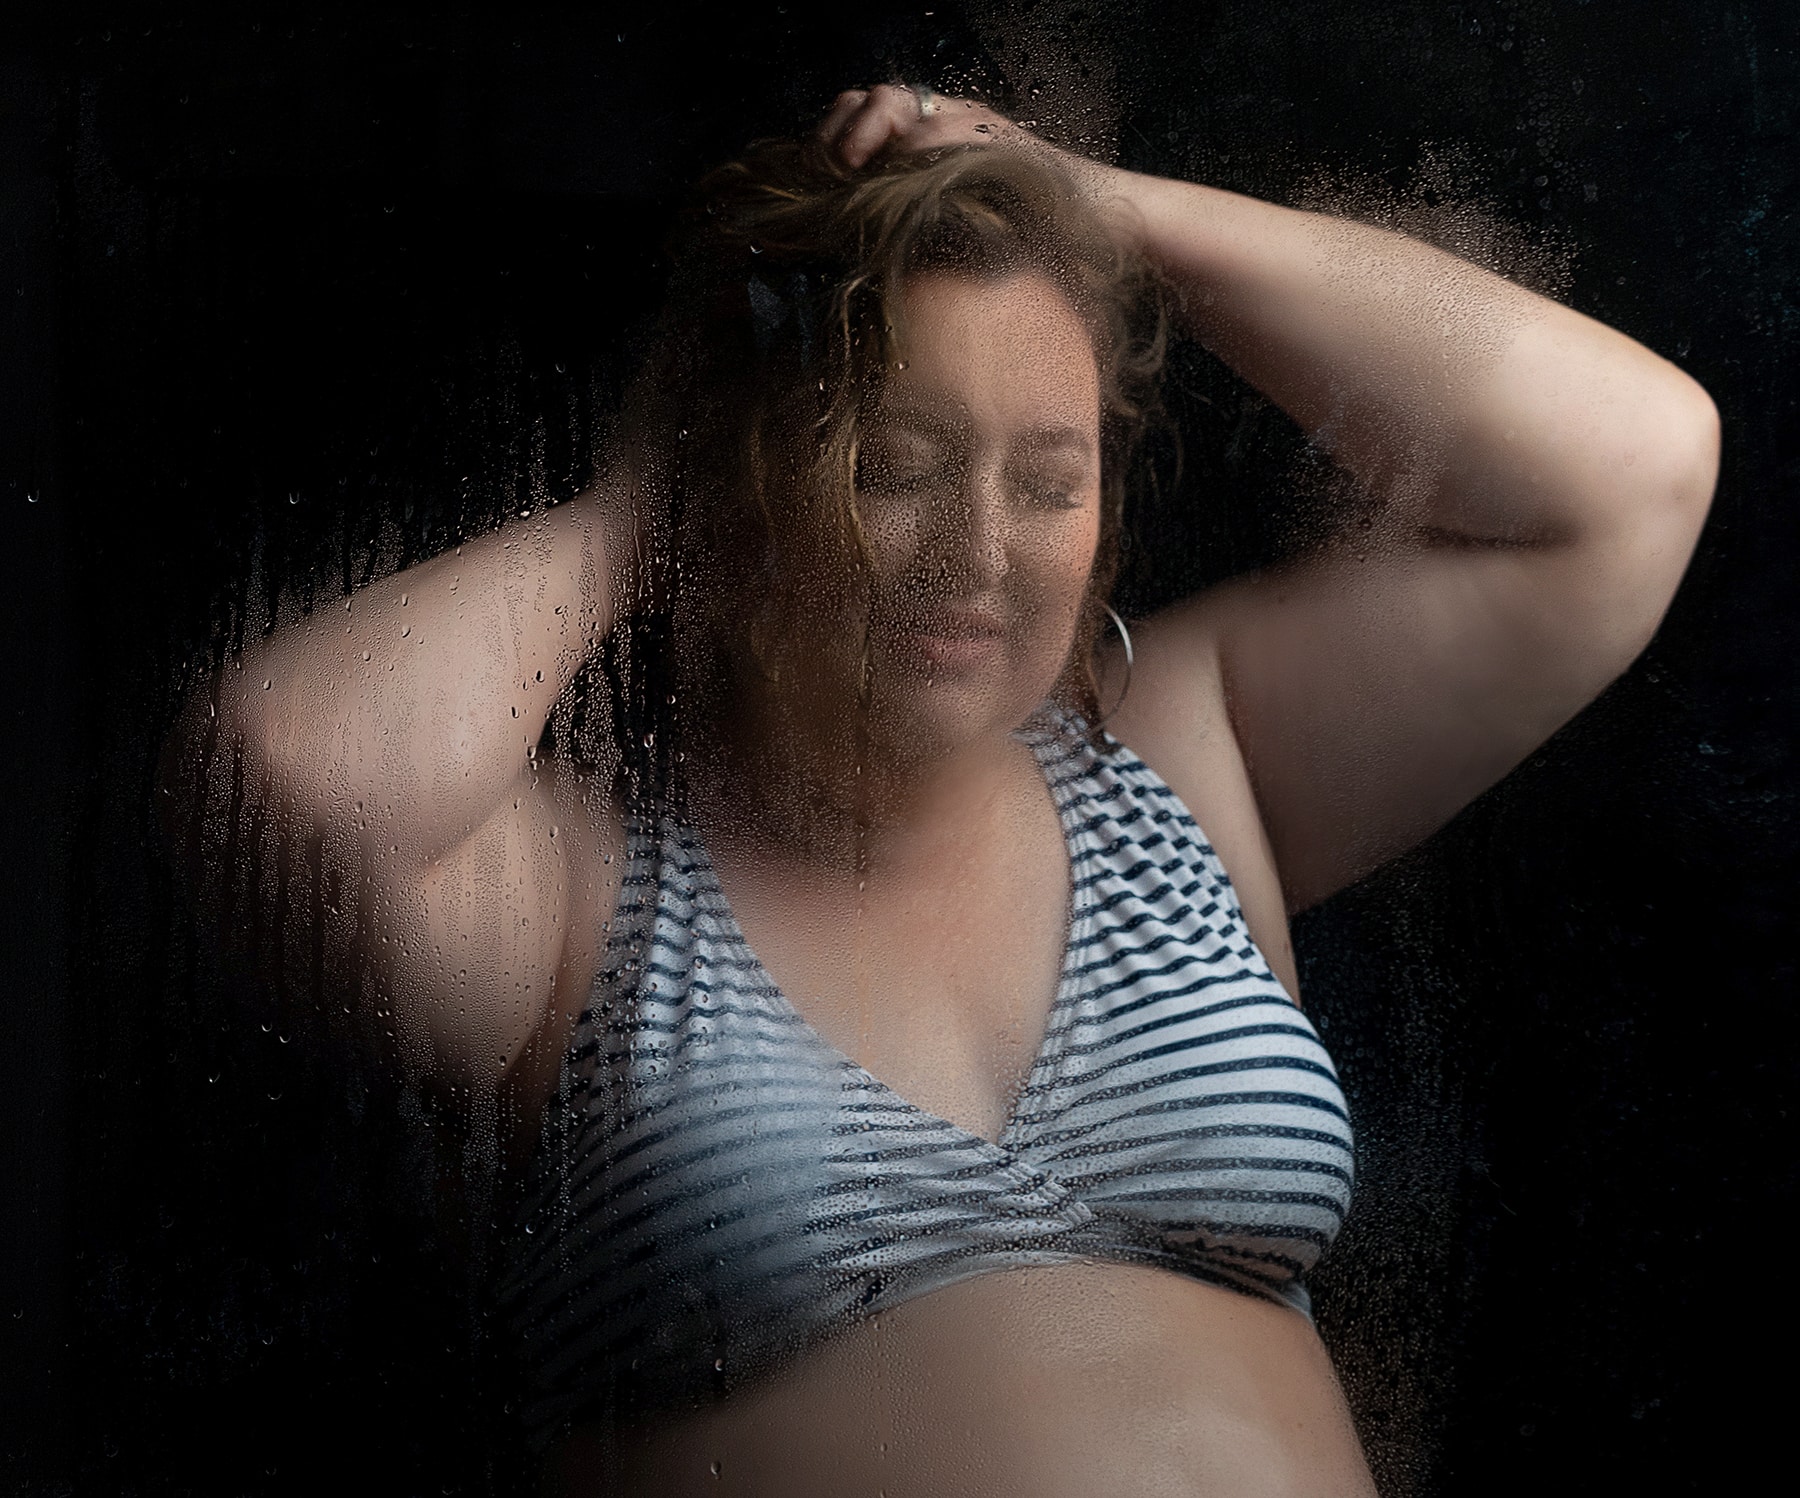 Plus size woman wears striped bikini top for a boudoir session with Shannon Hemauer Photography located near Harrisburg, PA.